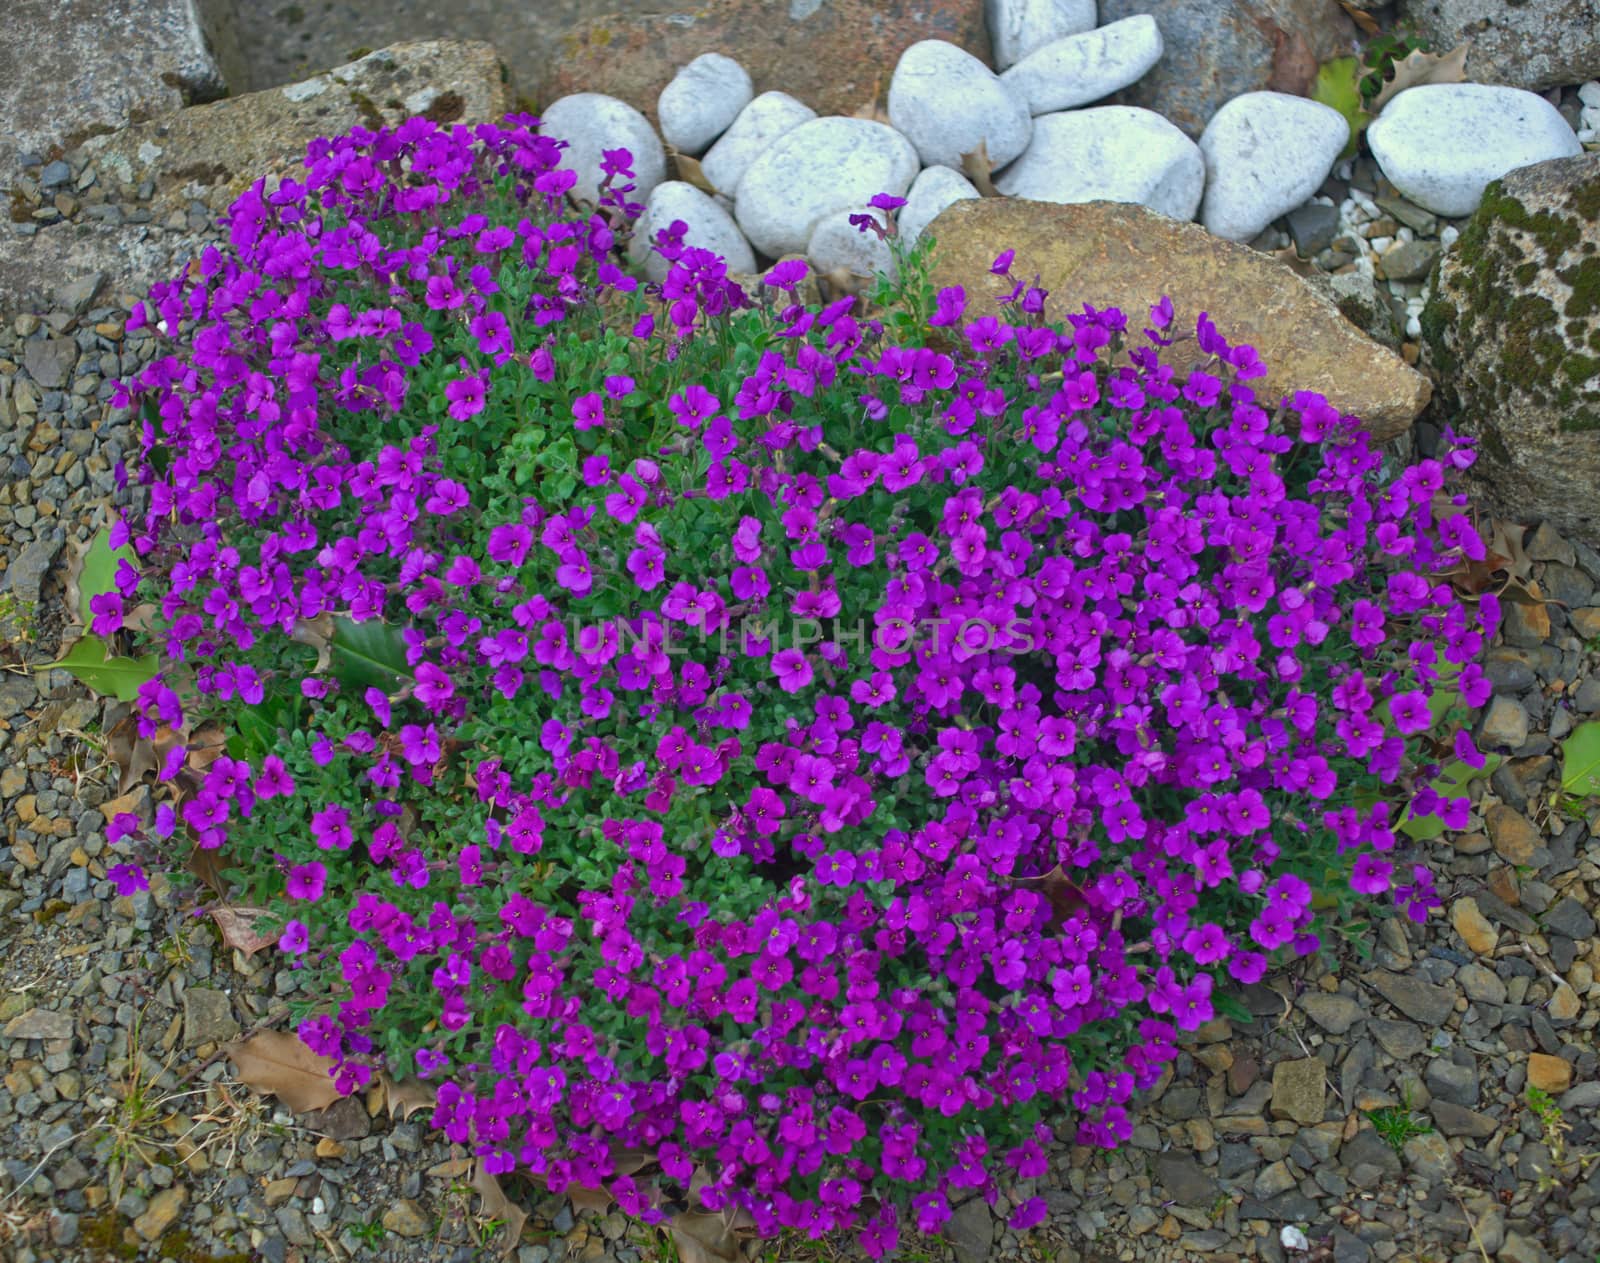 Plant blooming with small violet flowers on stone wall by sheriffkule